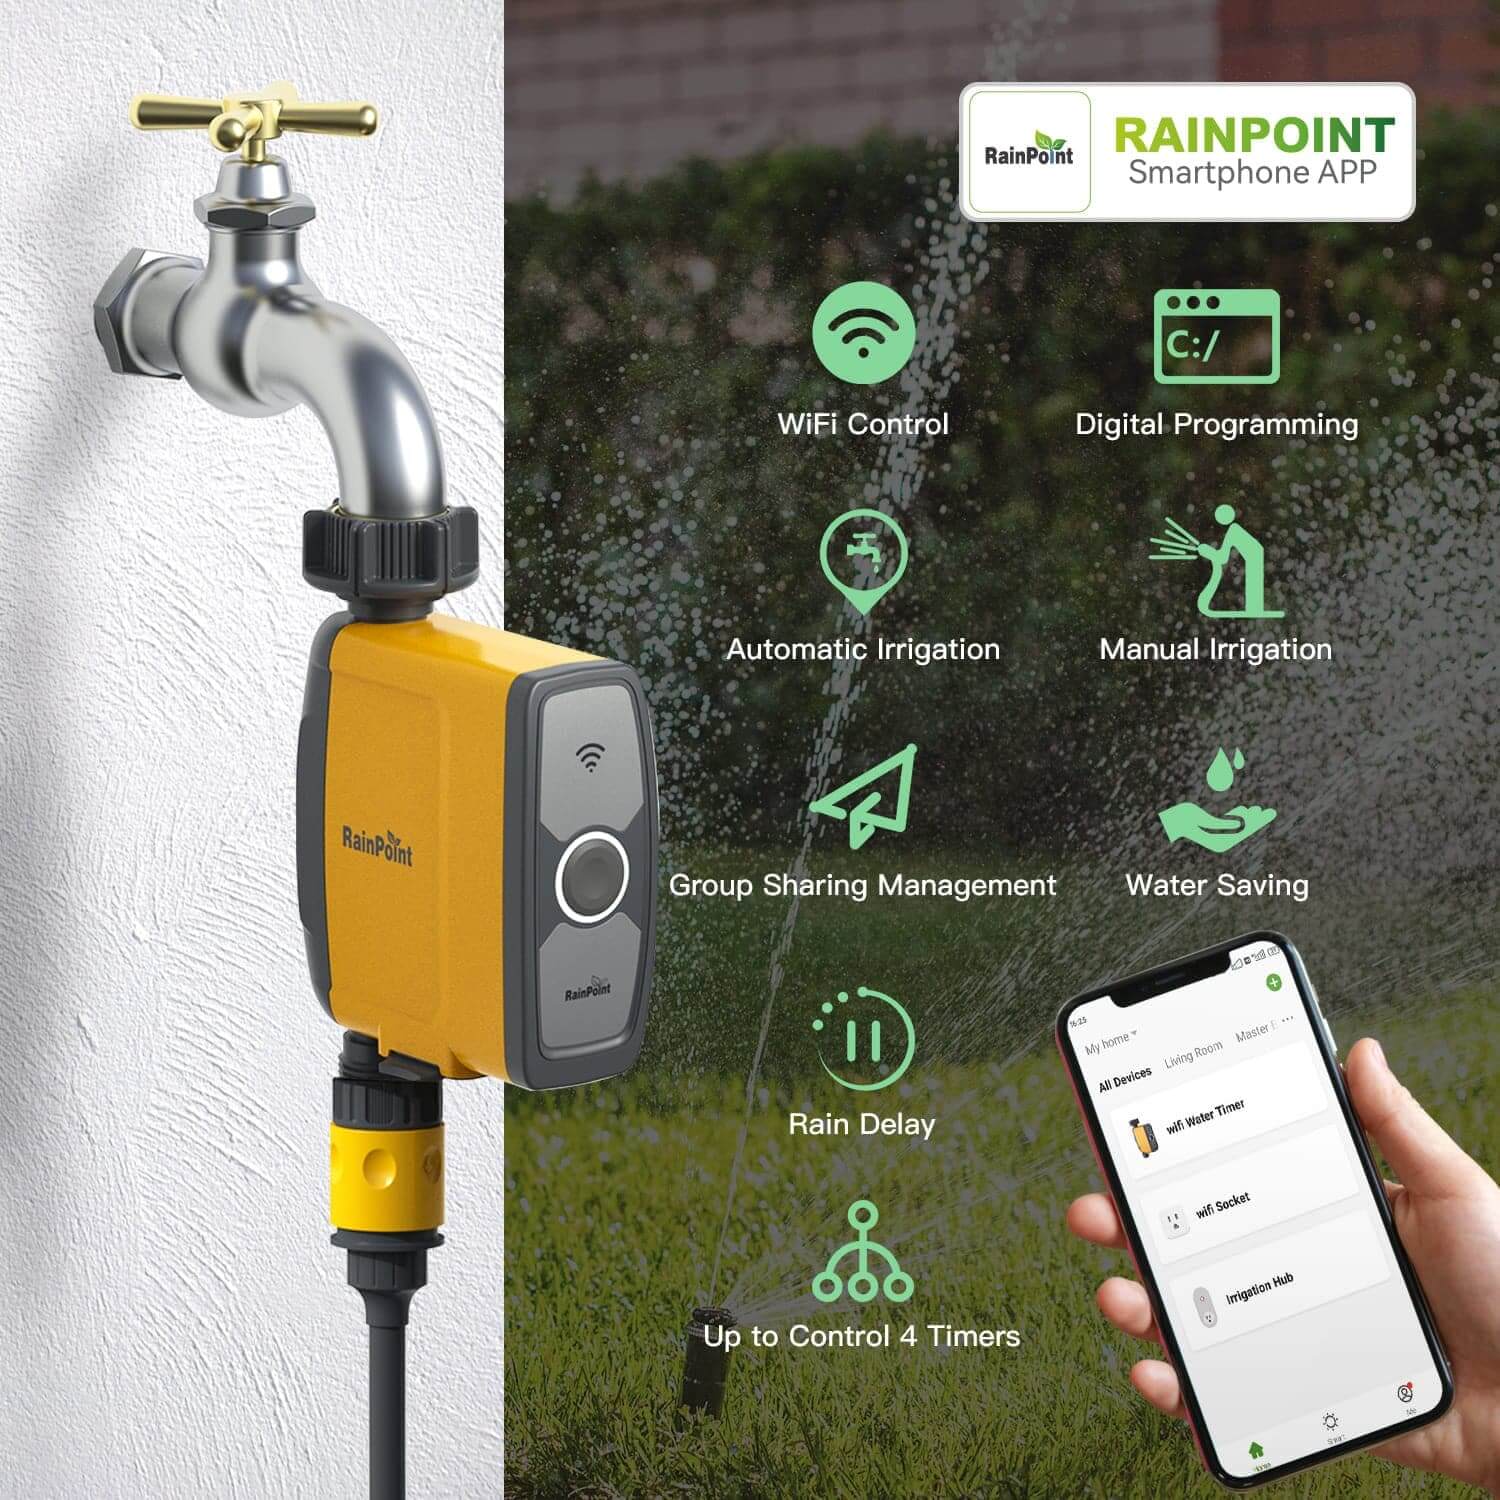  Easily connect the WiFi Hub to 2.4Ghz WiFi, and pair the timer, then you can manage your watering schedule via your phone APP at any time.